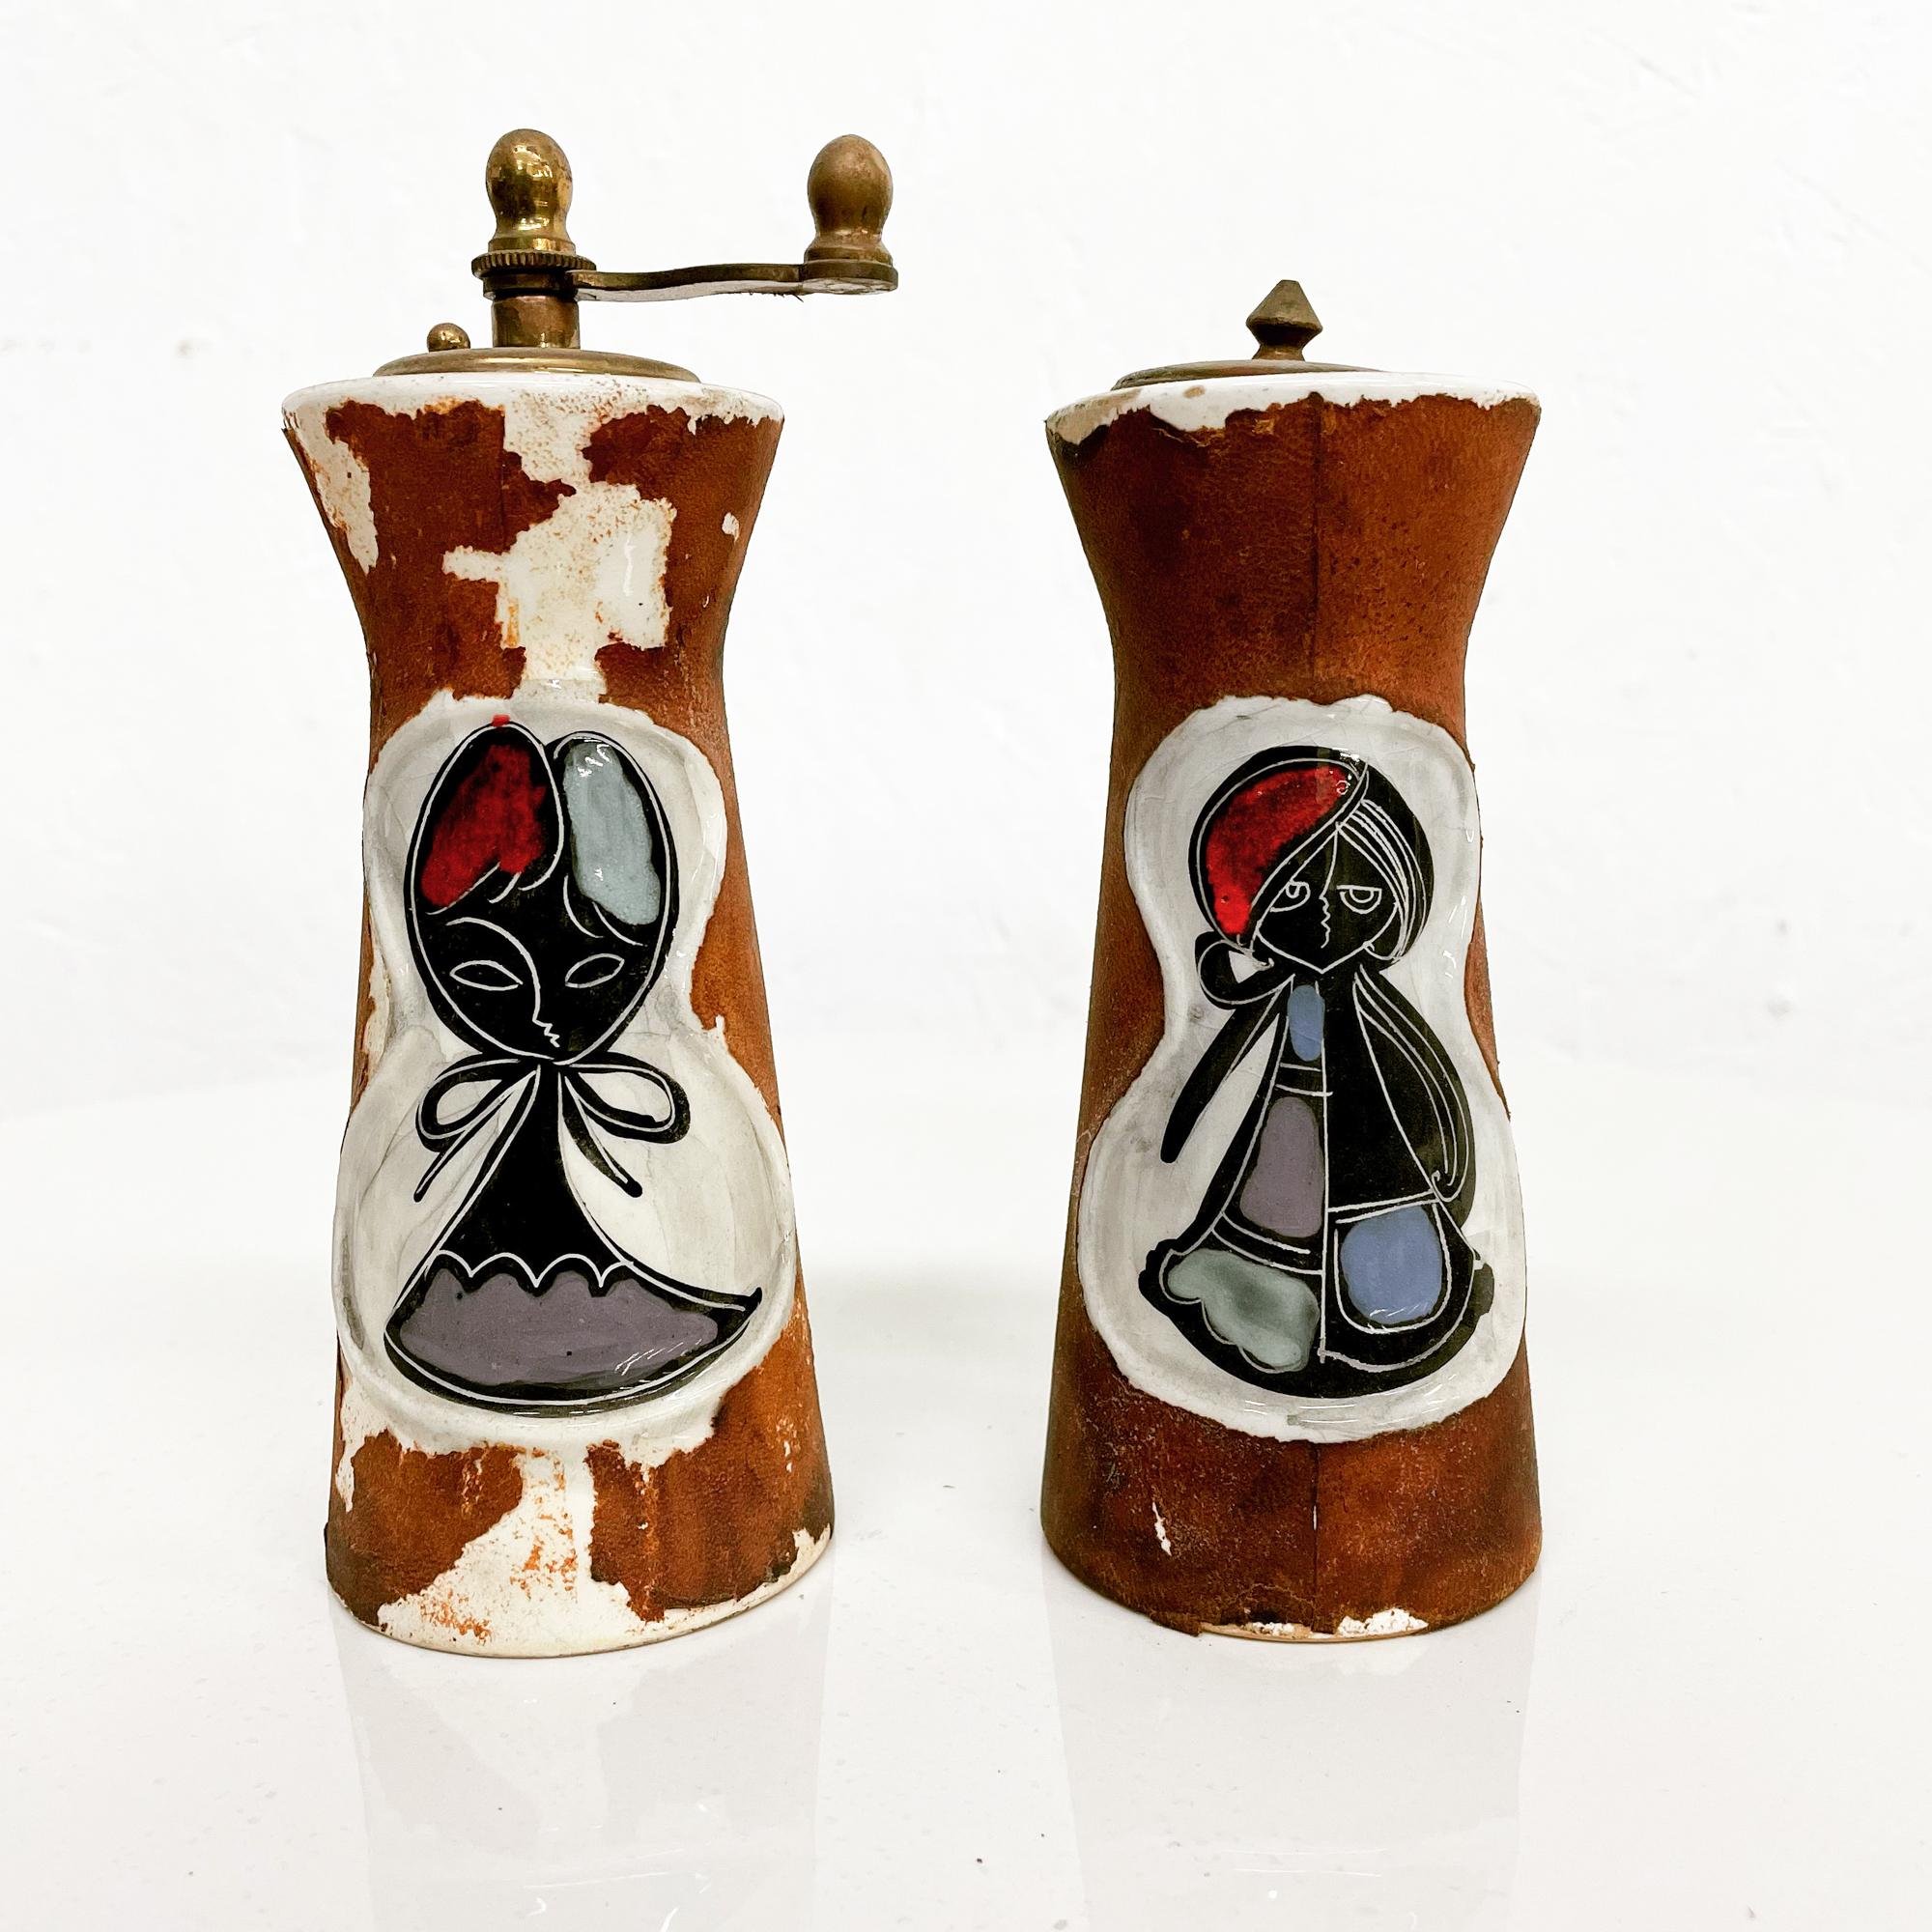 1960s Vintage Condition Italian Saltshaker Pepper Grinder Set
Decorative MCM drawing Raymor inspired design after Marcello Fantoni.
Stamped ITALY
Crafted in Ceramic and Leather. Vintage leather wrap is peeling.
Measures: 5.38 H x 2.38 in diameter